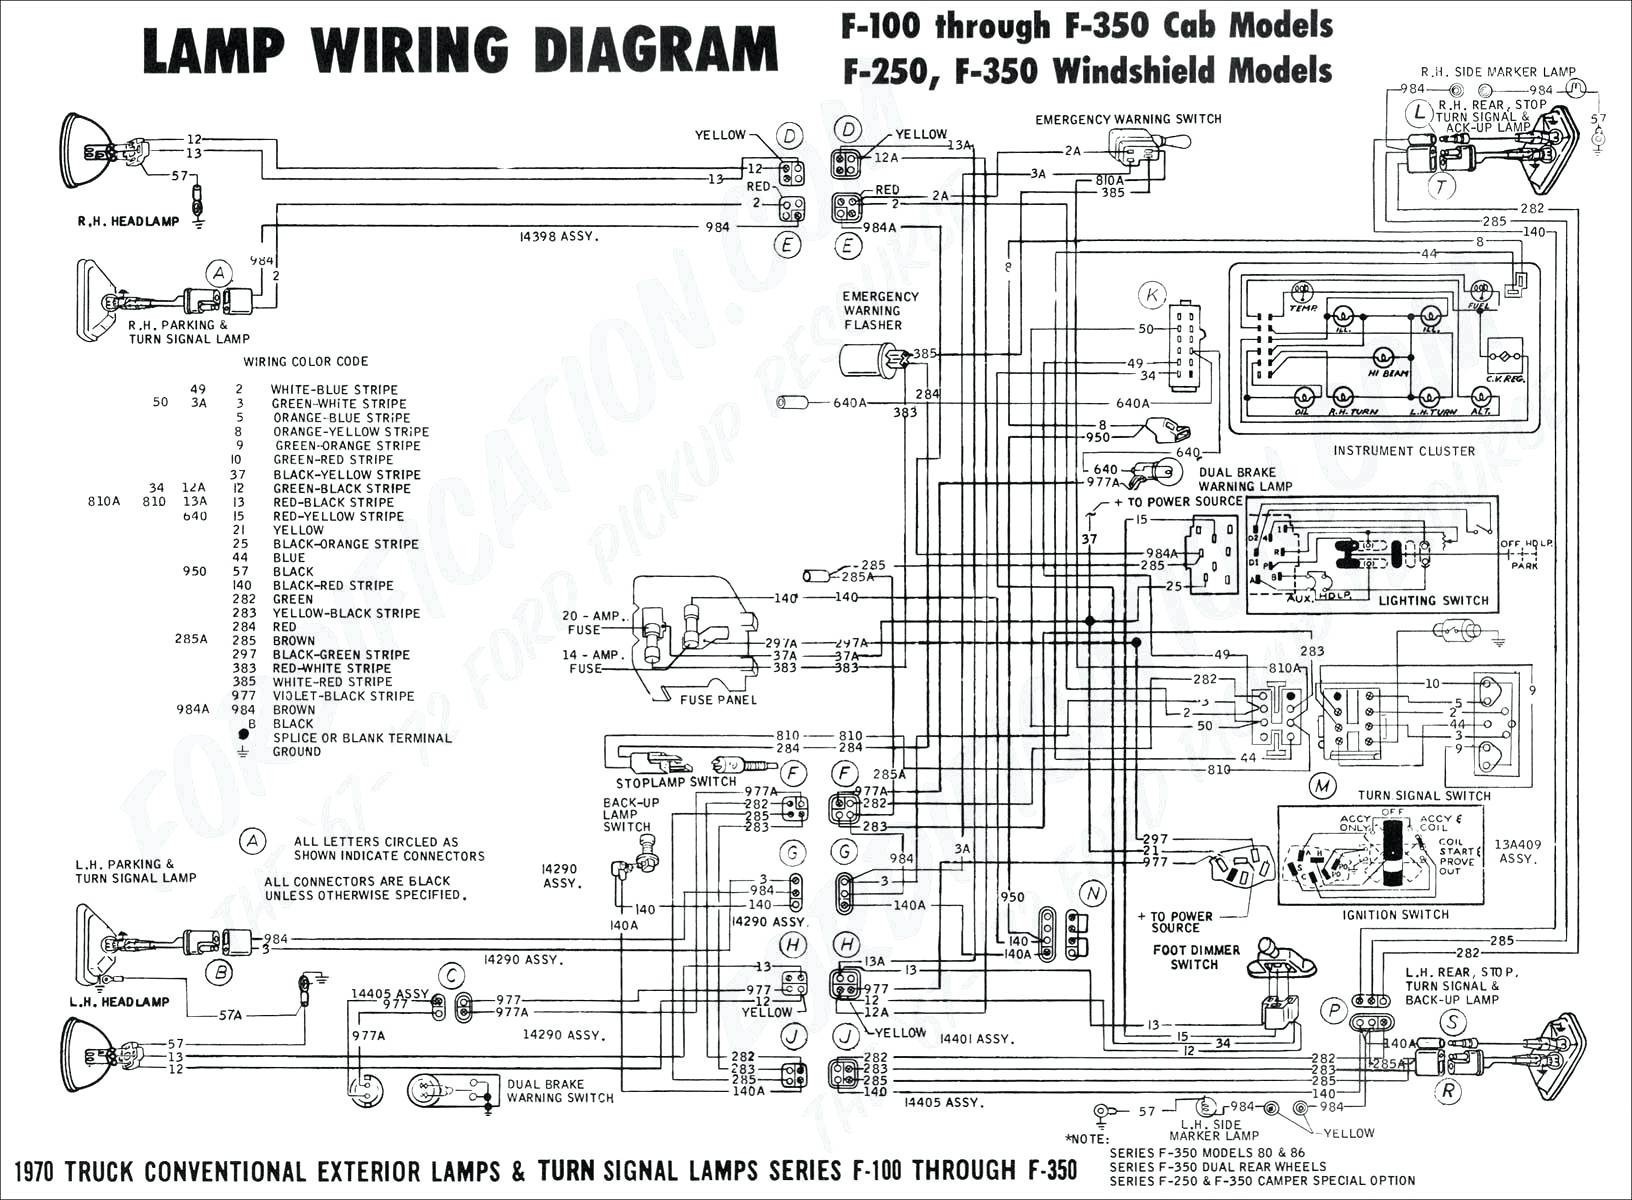 1993 Nissan Sentra Engine Diagram 1988 Dodge Alternator Wiring What Color Goes where Wiring Diagram Of 1993 Nissan Sentra Engine Diagram